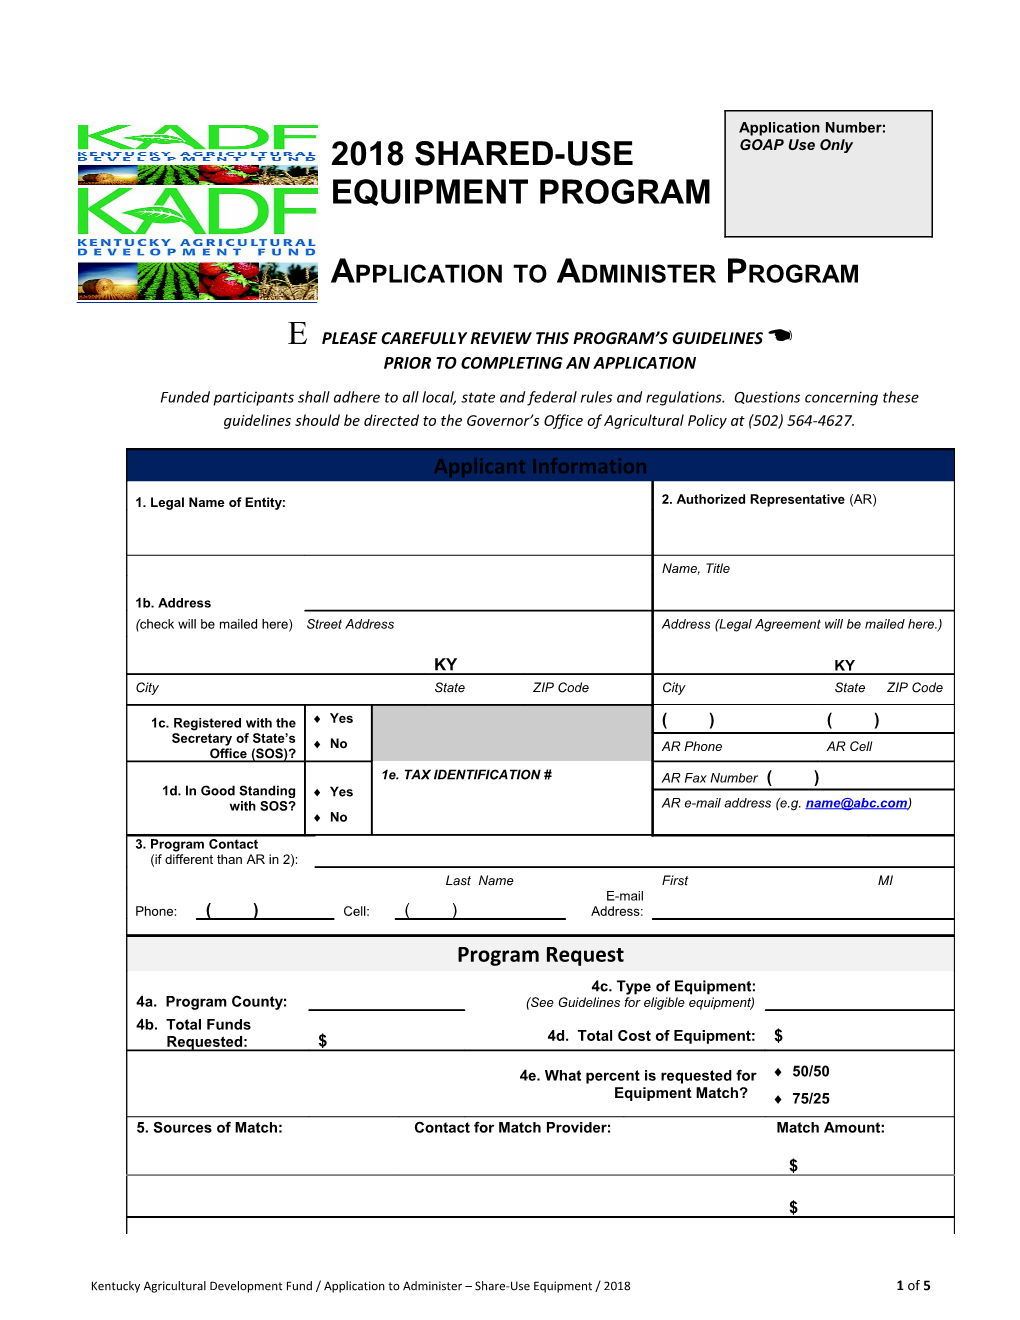 Shared-Use Equipment Program Application and Guidelines